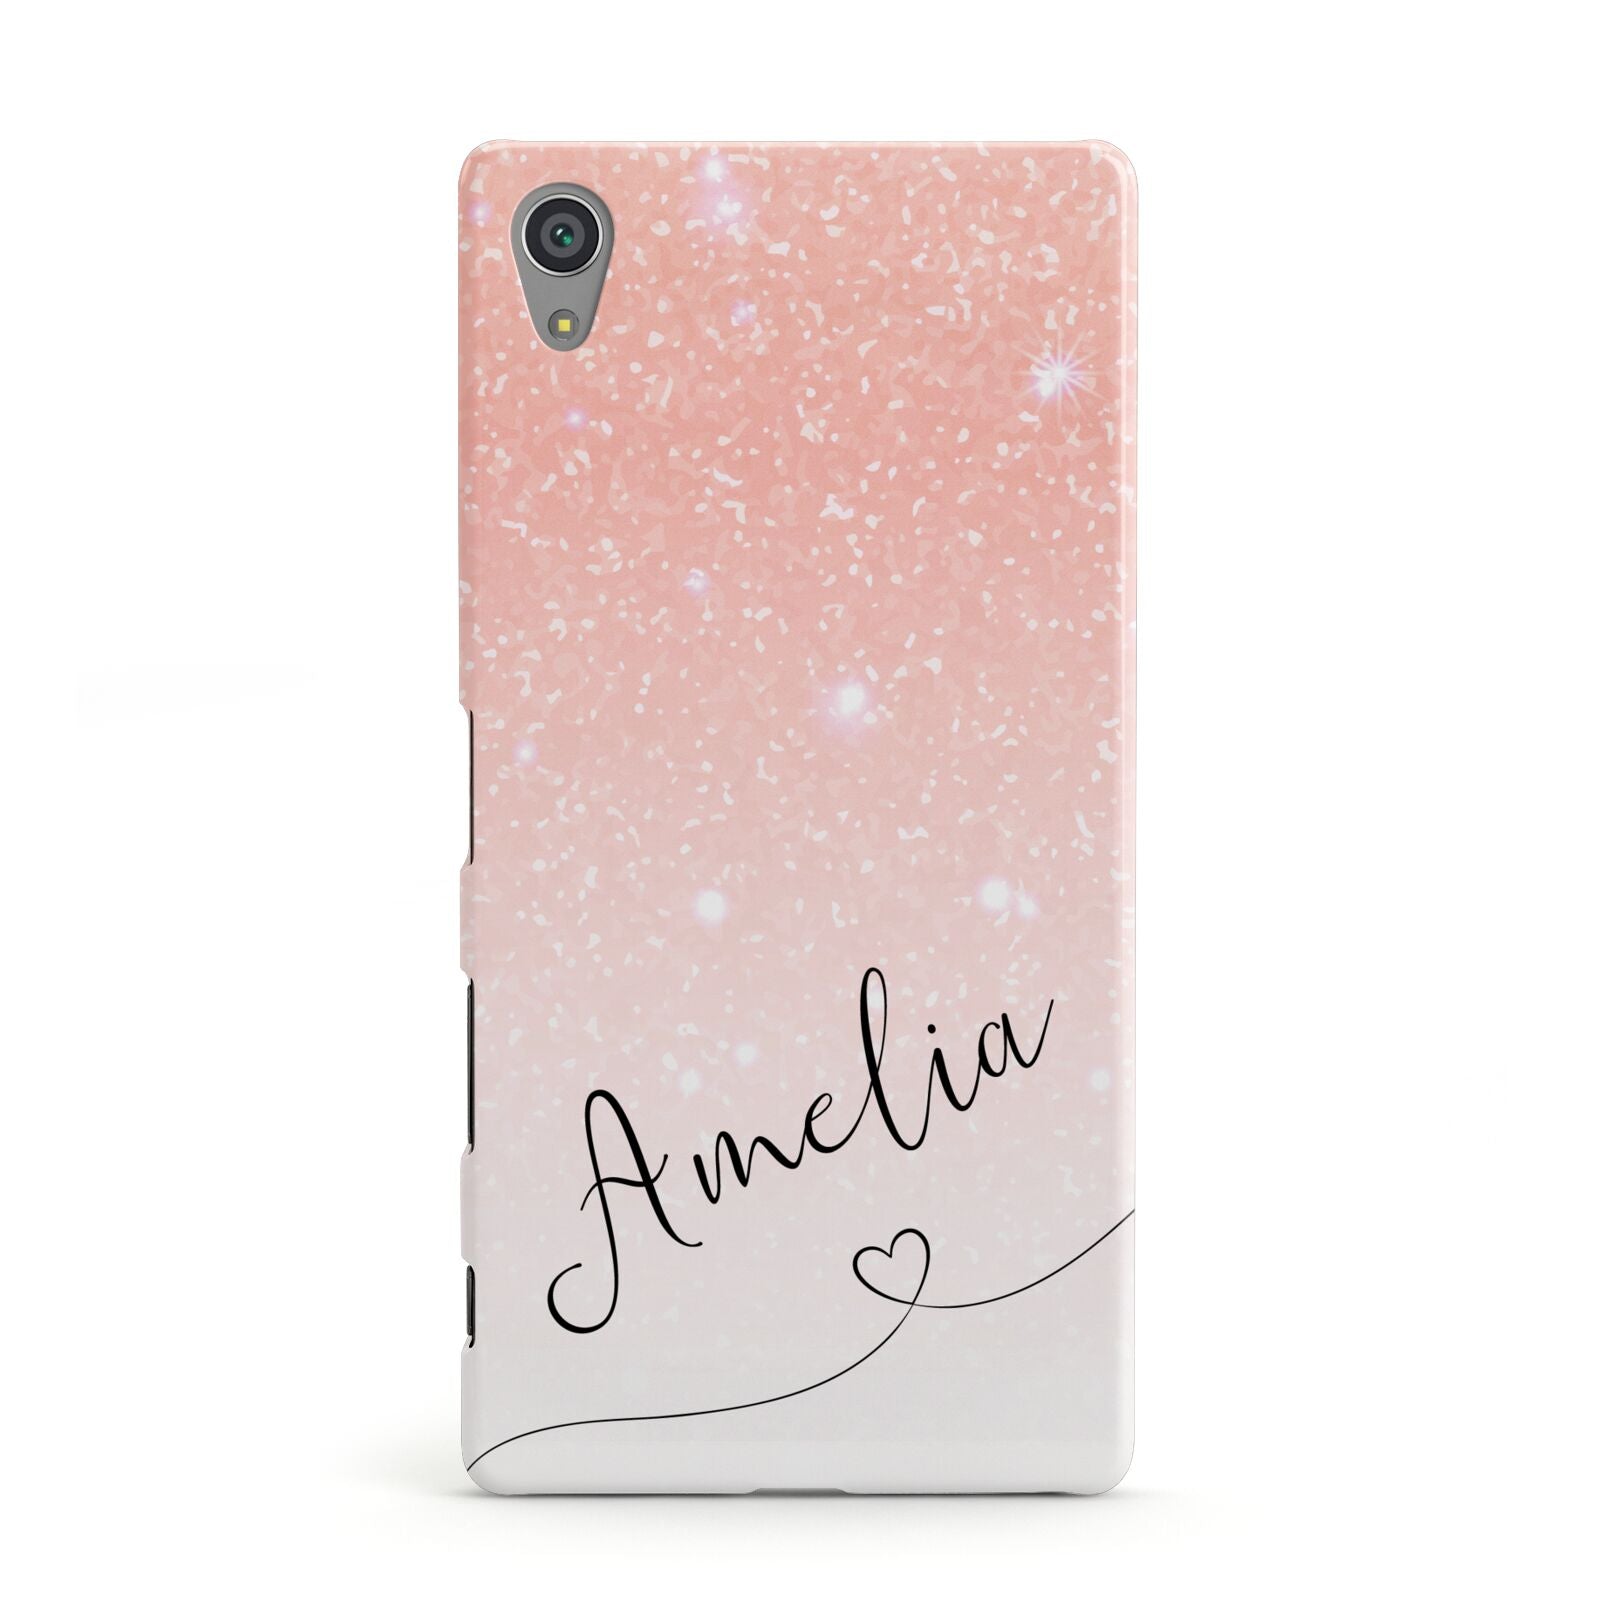 Personalised Pink Glitter Fade with Black Text Sony Xperia Case